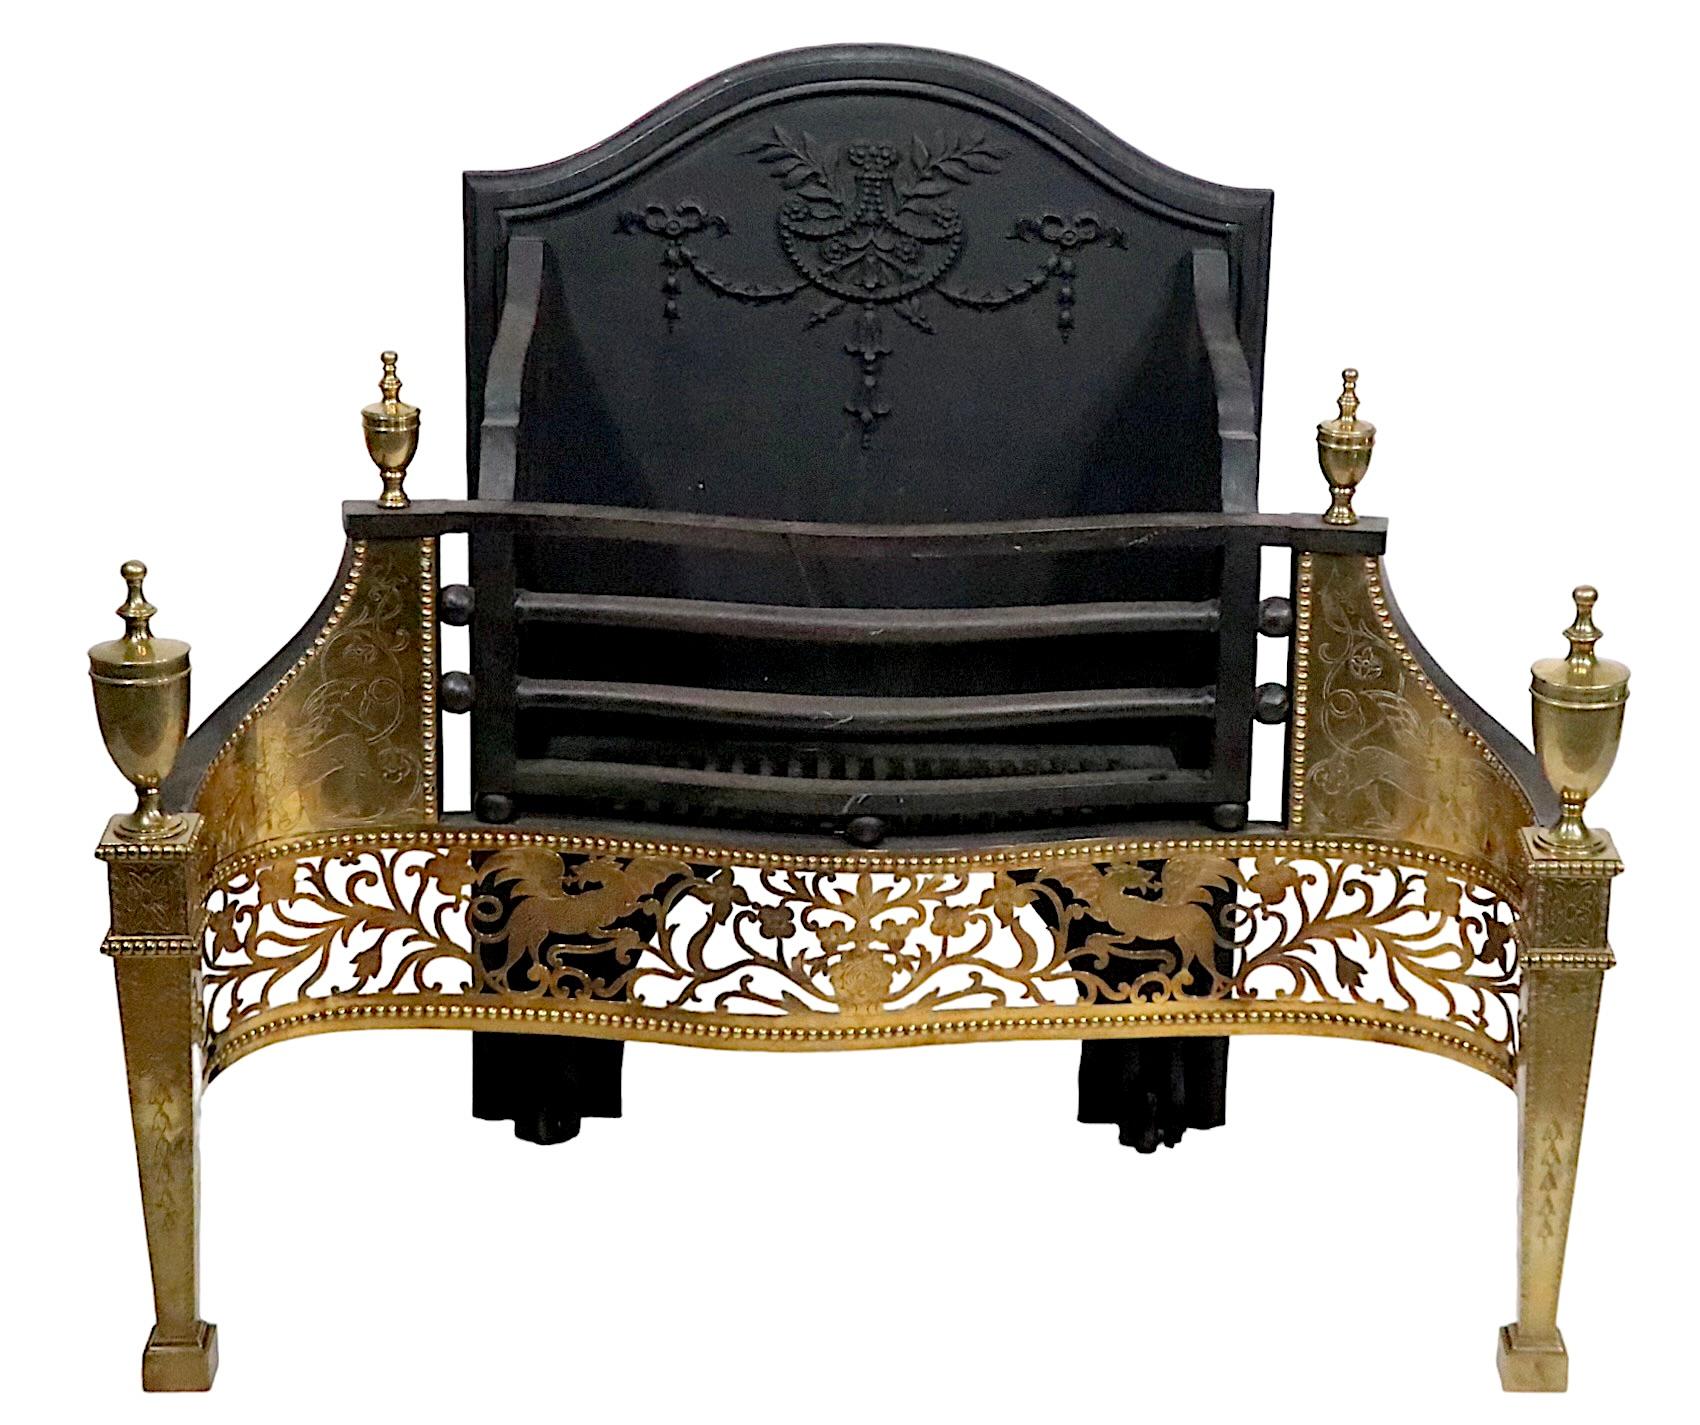 Neoclassical Revival Classical Revival English Hoole Cast Iron and Brass Fireplace Coal Grate Insert 